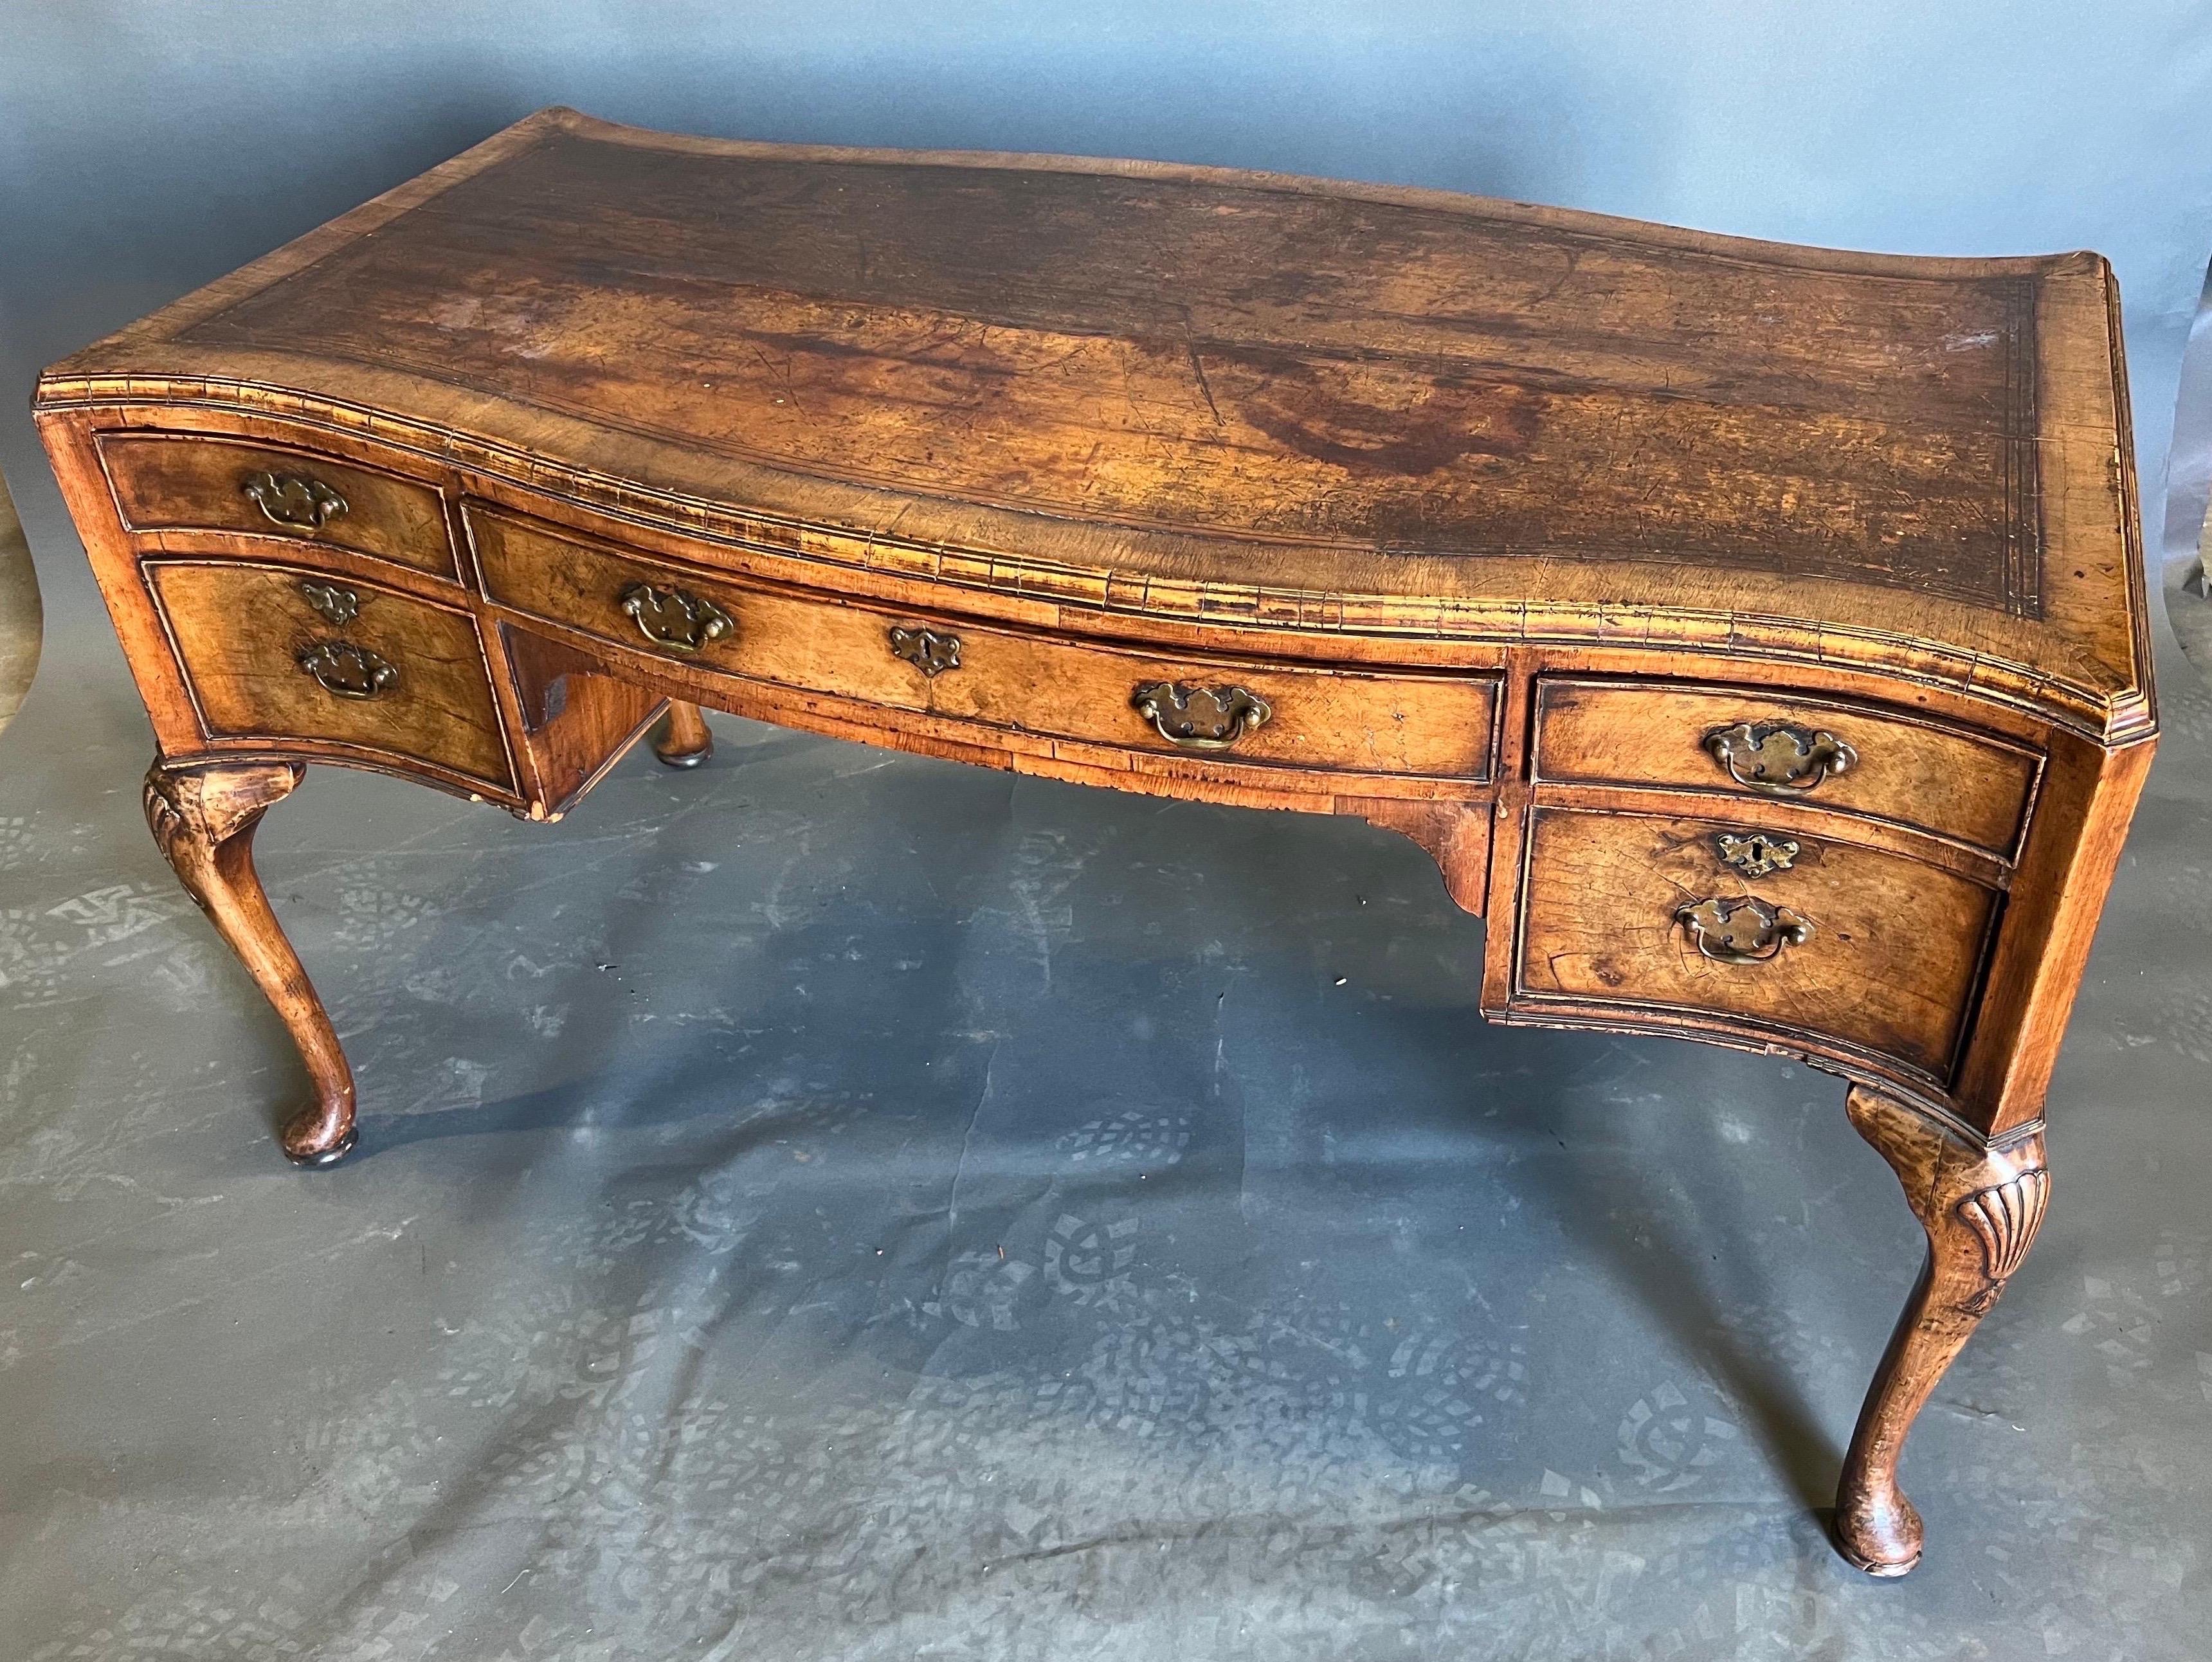 Gorgeous wear and patina on this burl walnut and leather top Georgian style desk from late 19th century. Early Georgian style with burl walnut and leather top raised on pad feet with a 24.25